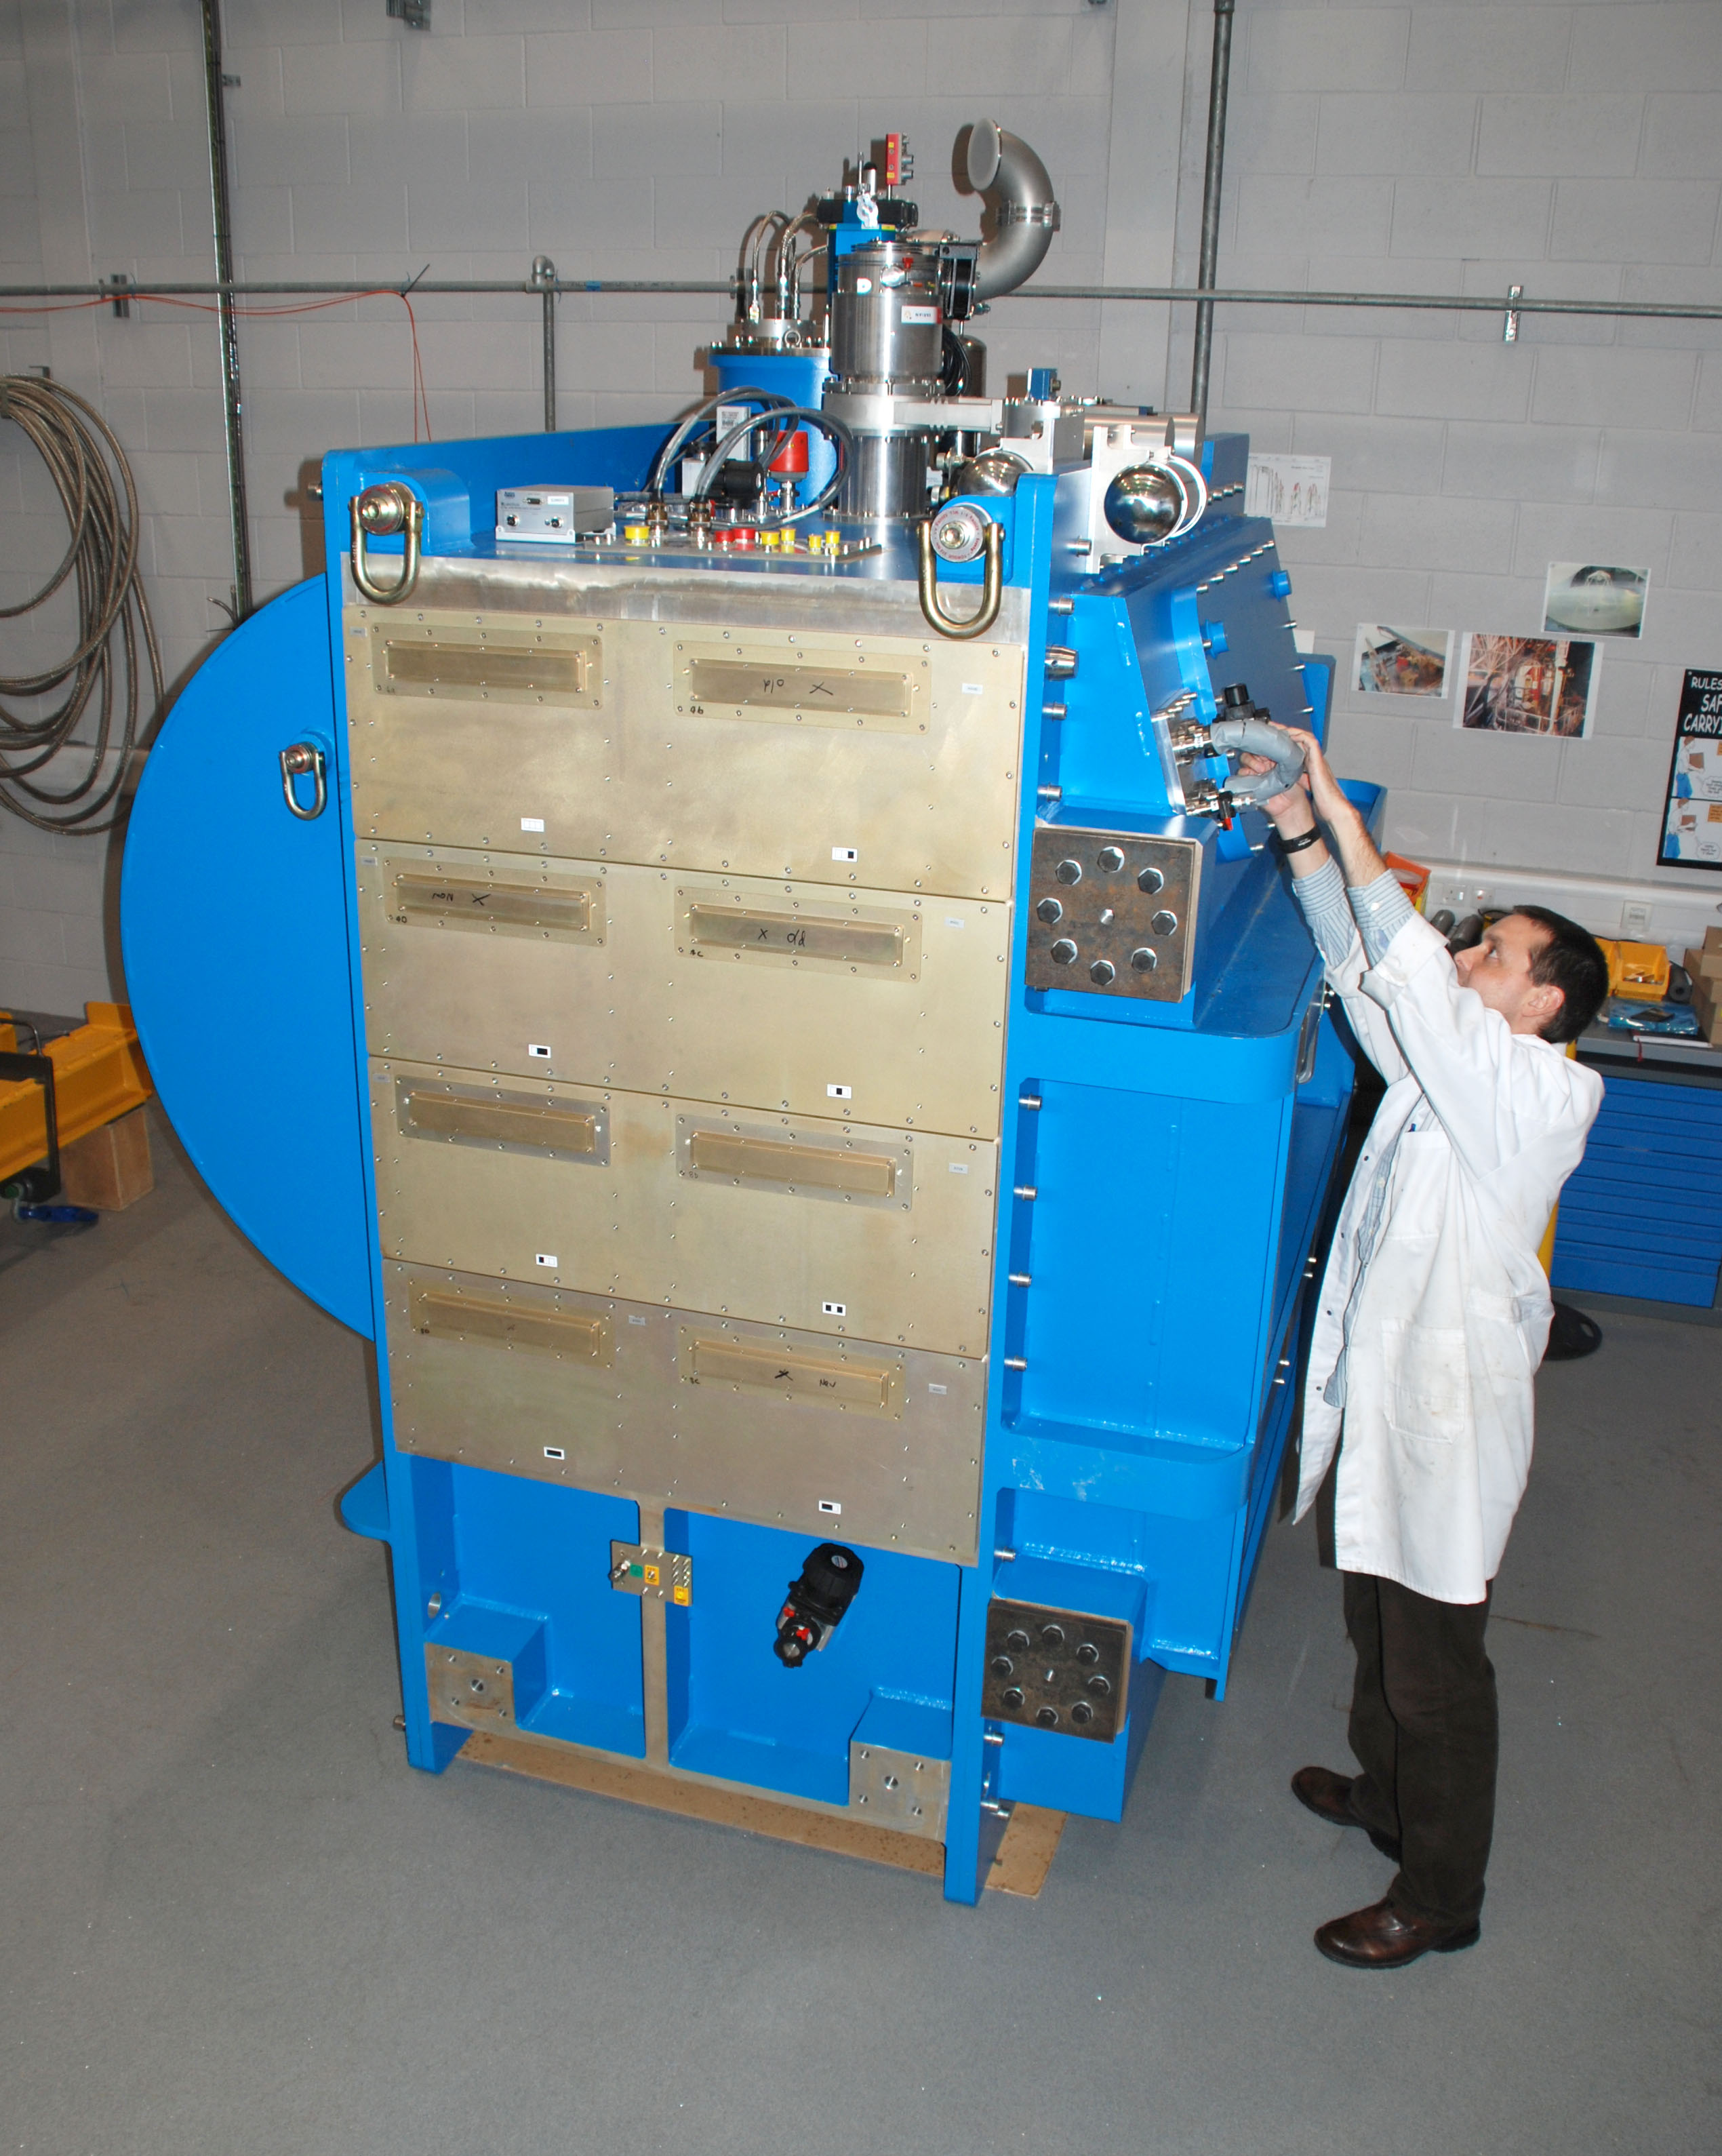 A scientist makes adjustments to SCUBA 2, which is a large blue and metal astronomical instrument, in the lab at UK ATC.